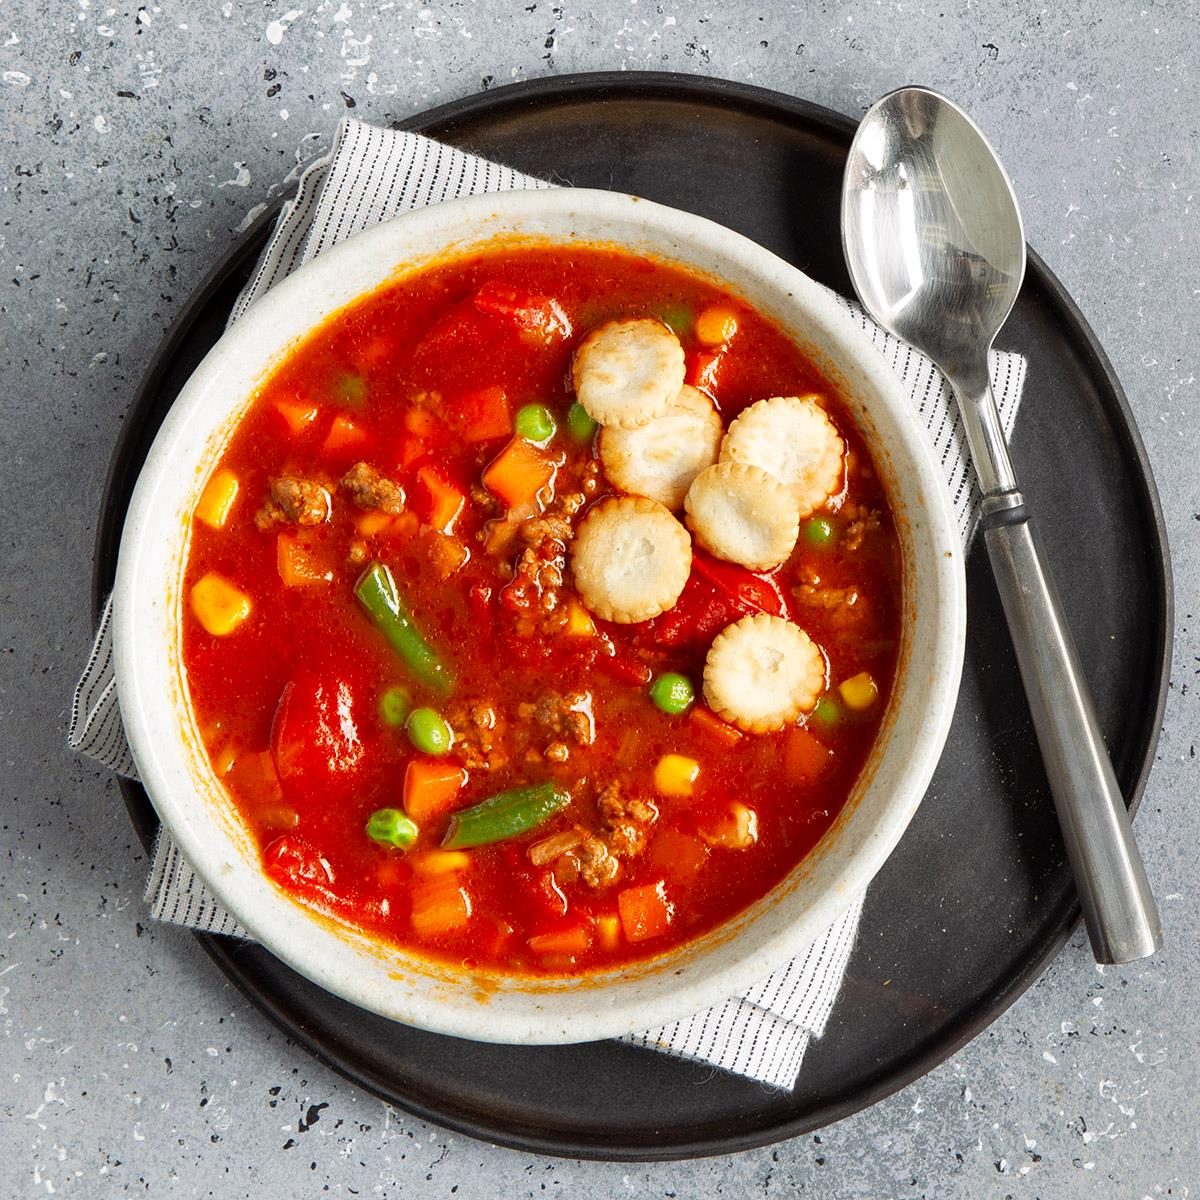 50 Soup Recipes to Make for a Cozy Dinner